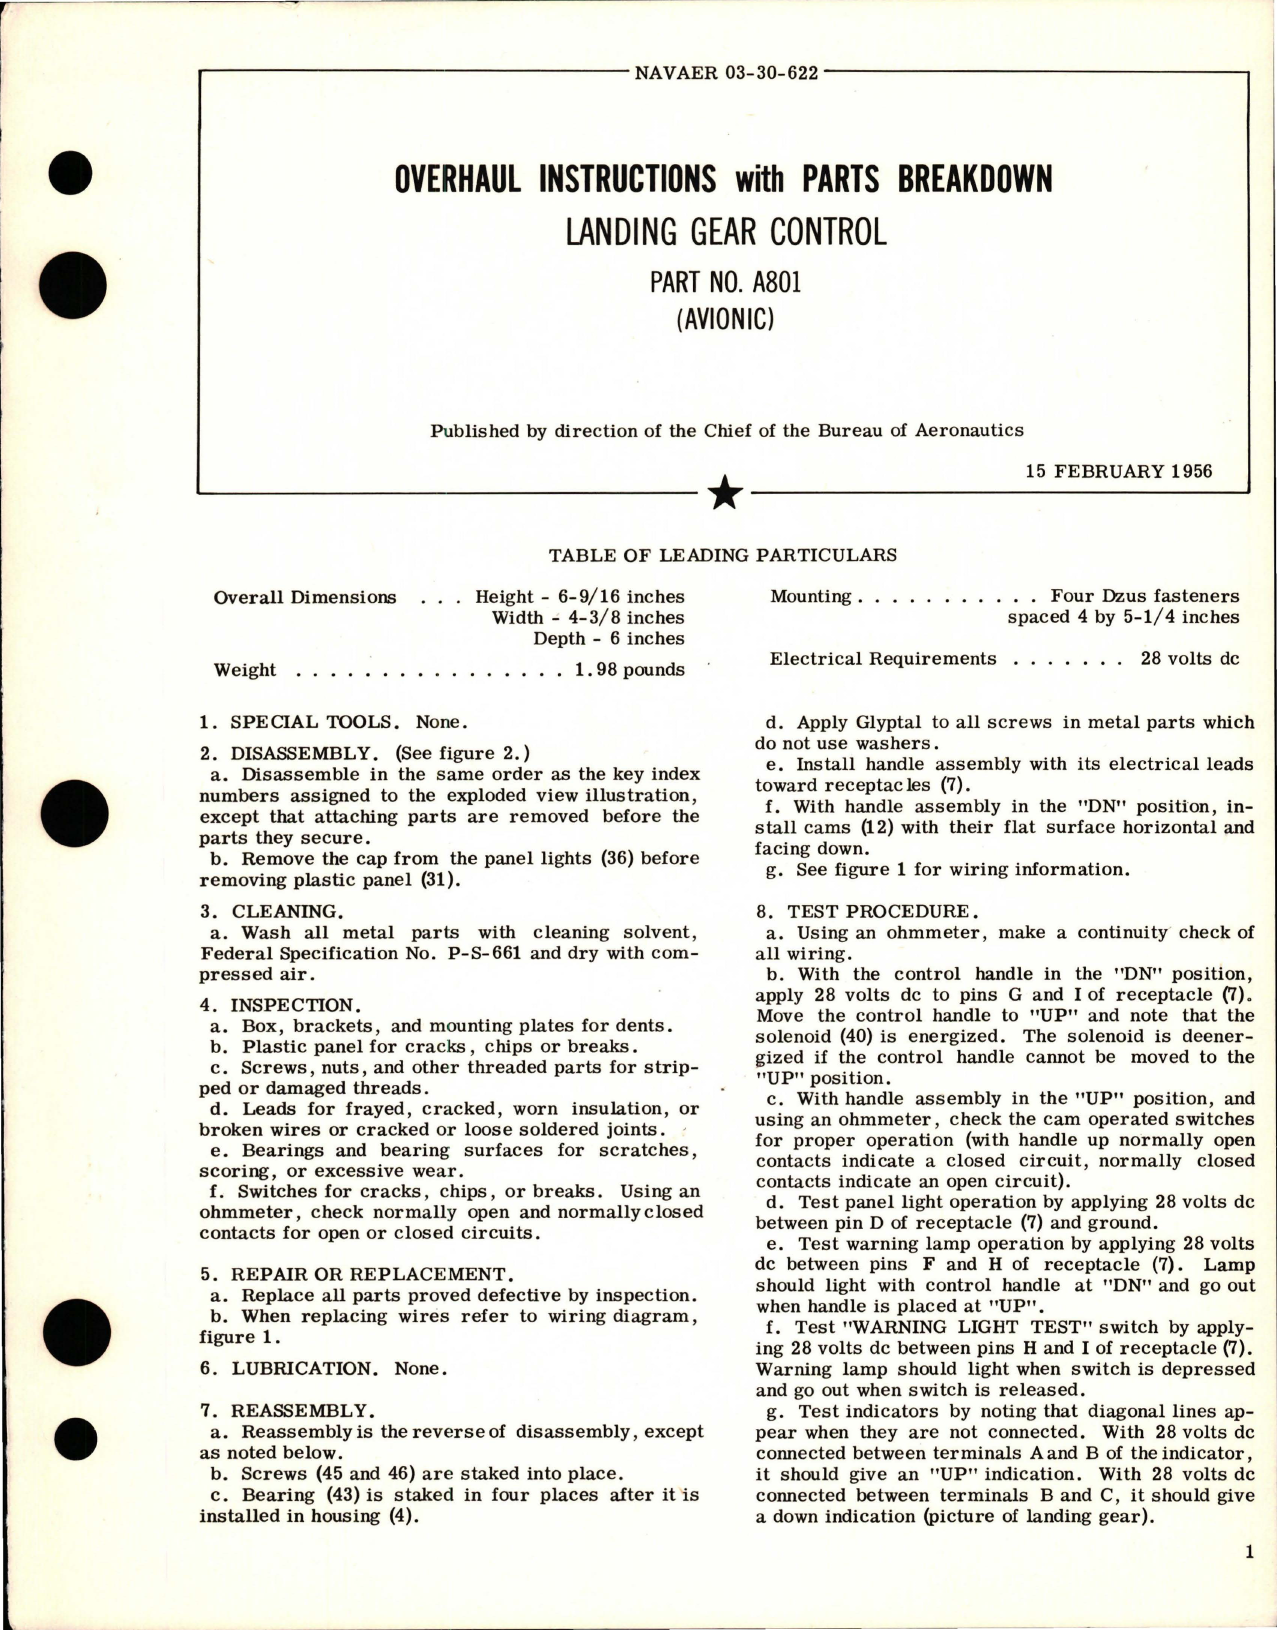 Sample page 1 from AirCorps Library document: Overhaul Instructions with Parts Breakdown for Landing Gear Control - Part A801